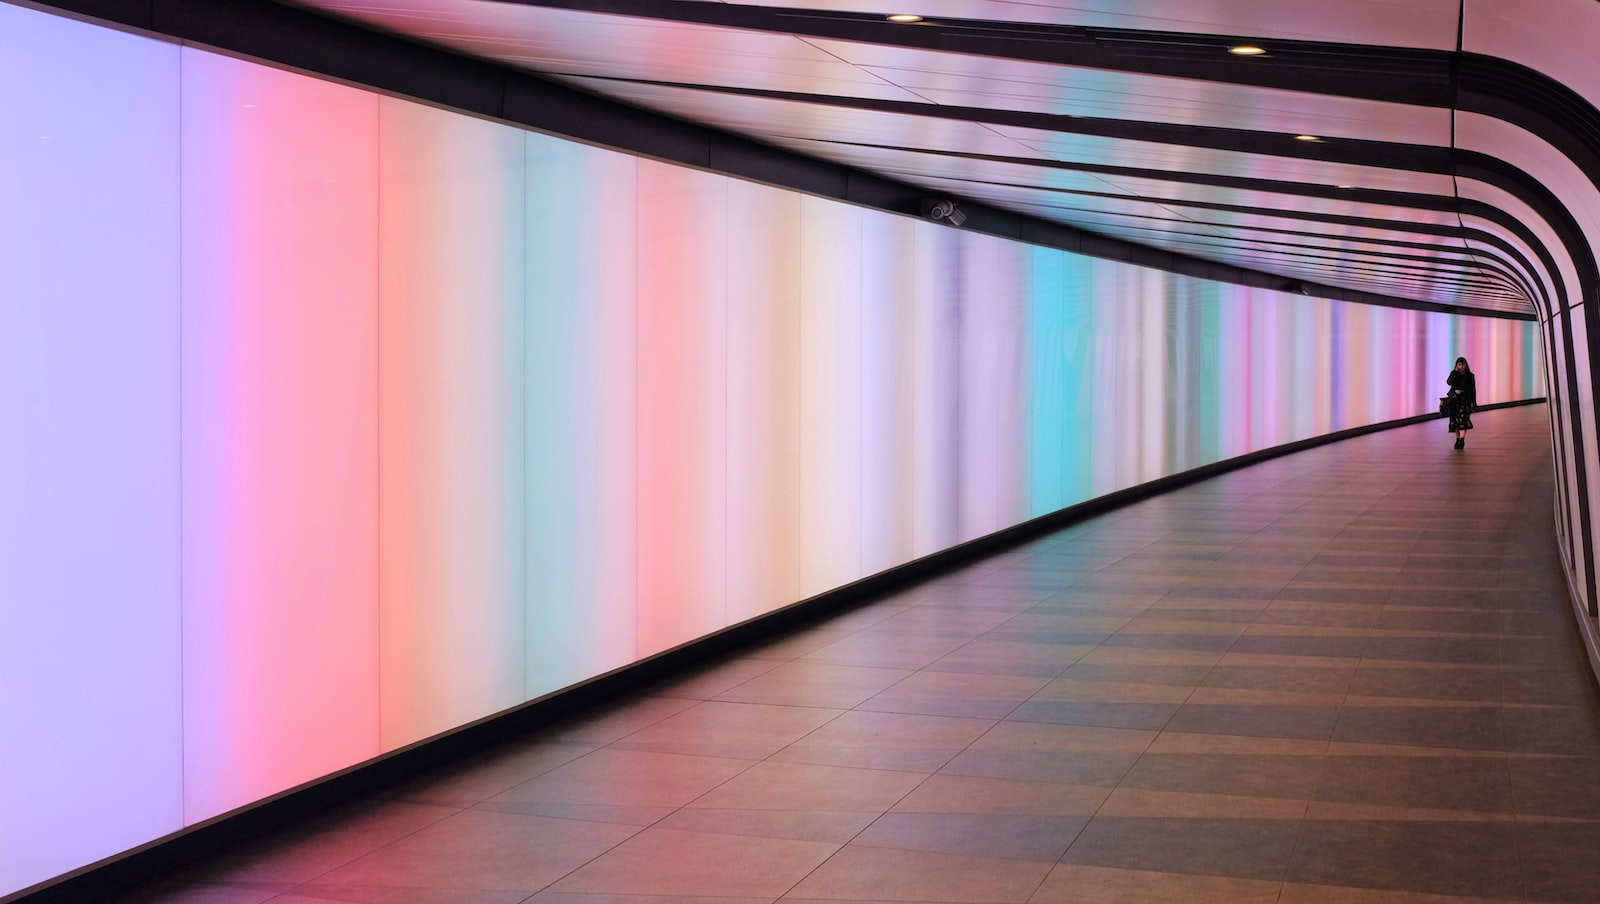 Dazzling Journey Through the Color Tunnel: The Science and Psychology of Color Perception